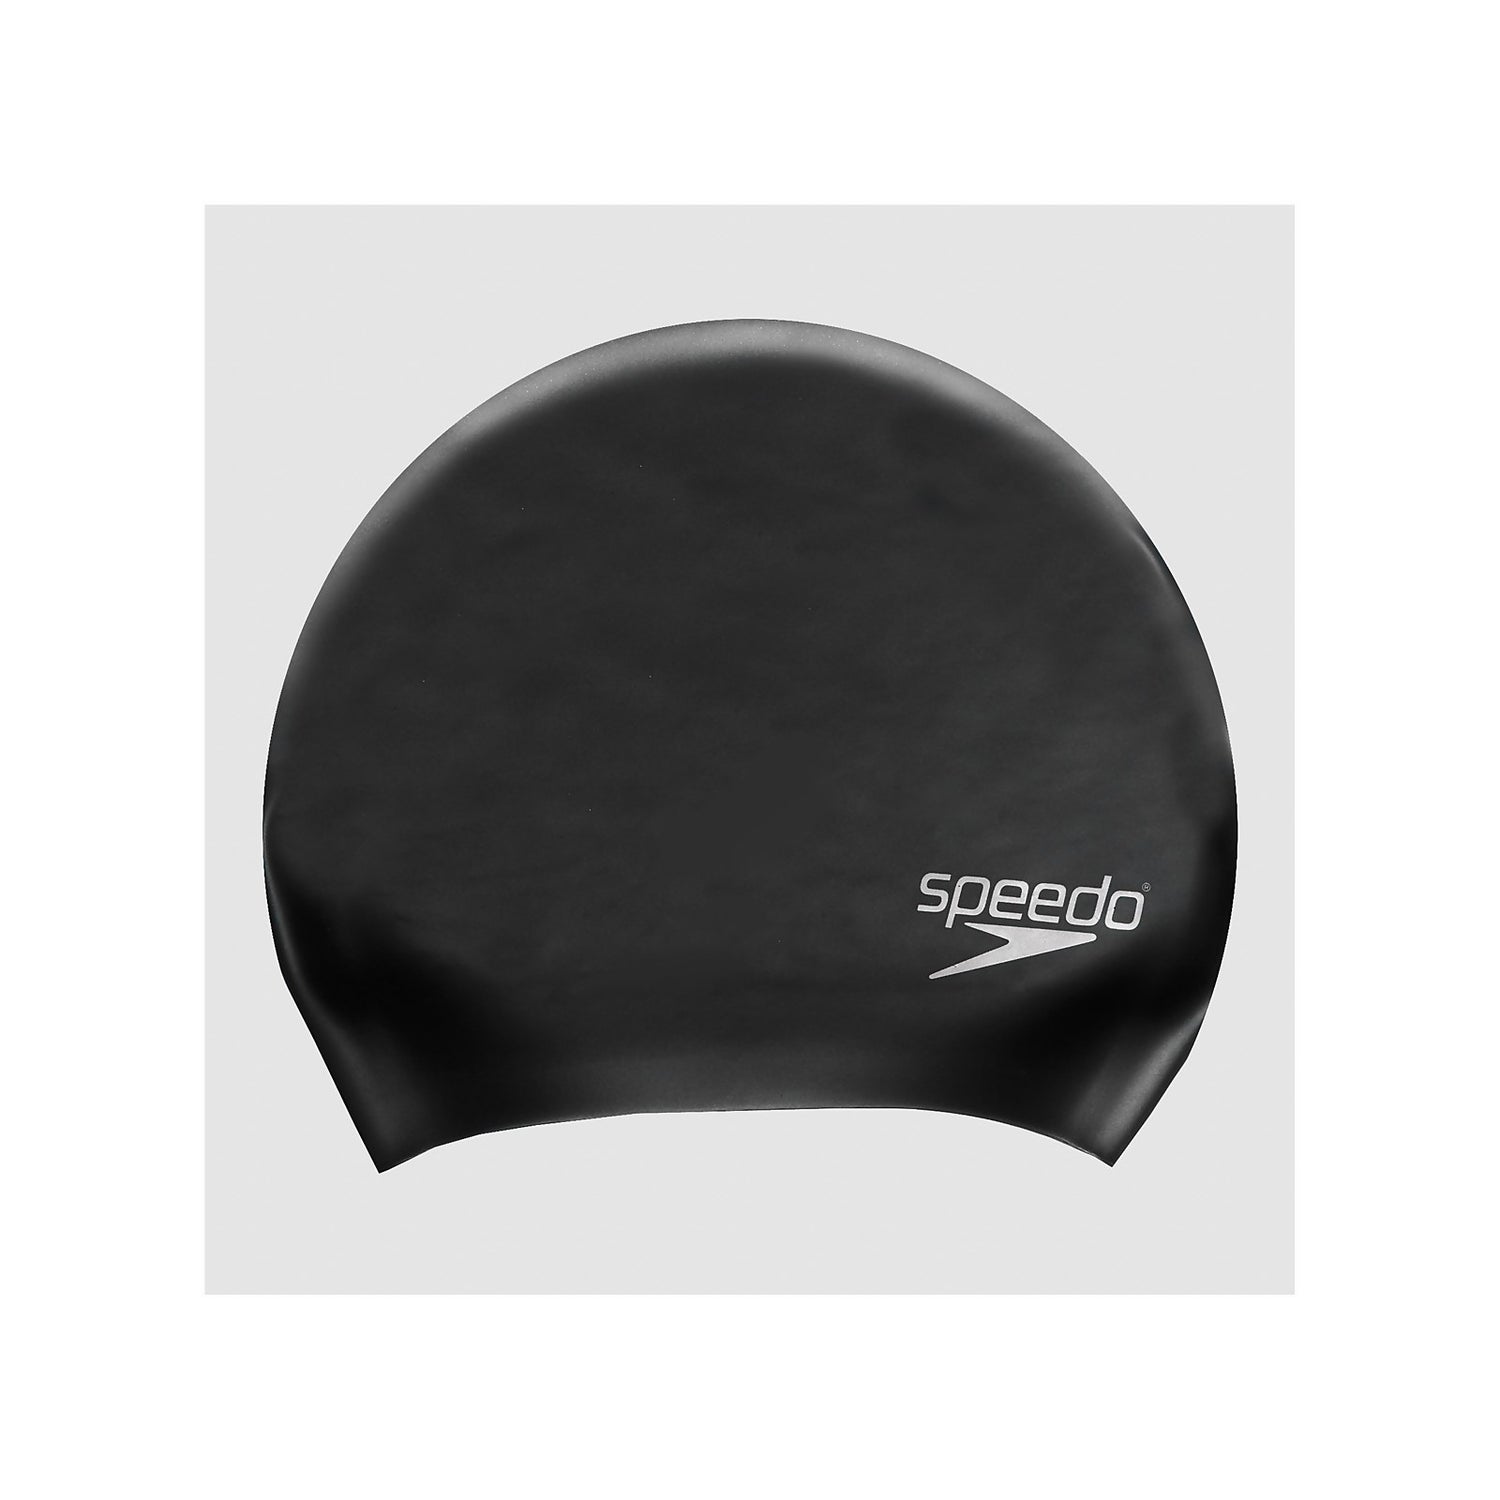 Speedo Long Hair Swimming Adult Sized Moulded Silicone Swim Cap 